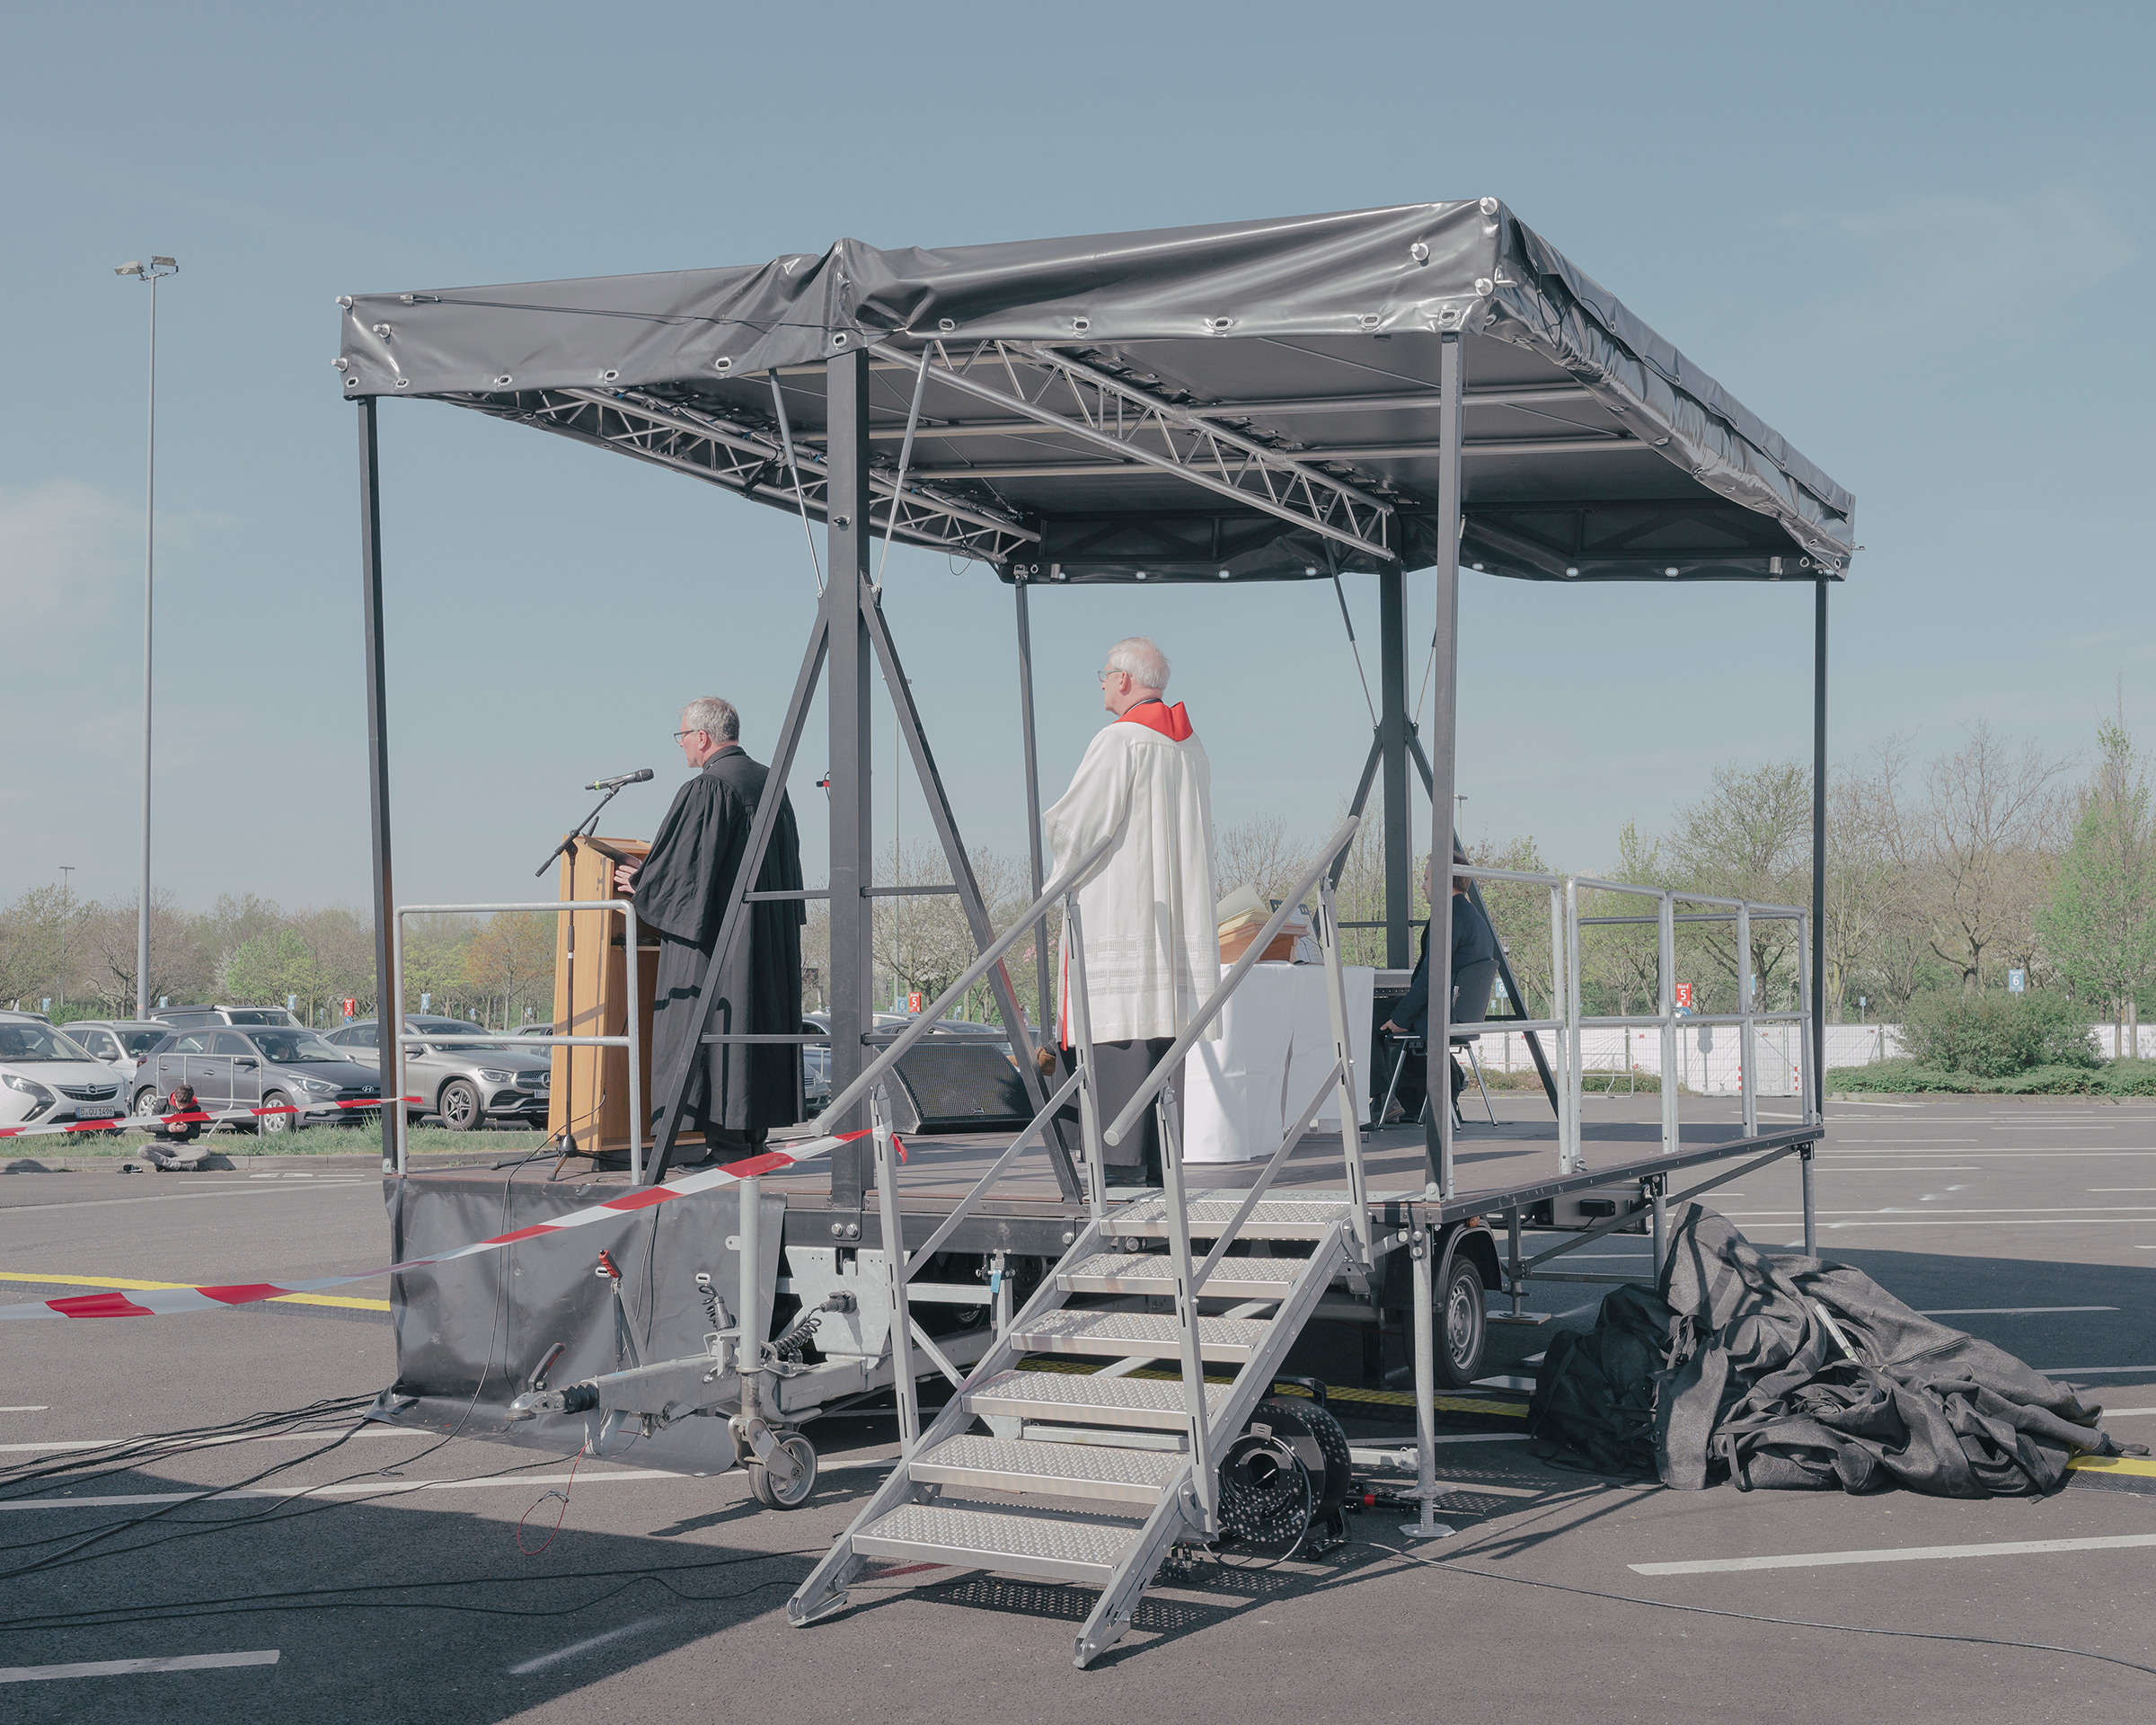 Easter services are held at a drive-in cinema in Düsseldorf on April 10, as church services have been prohibited throughout Germany since March 16.